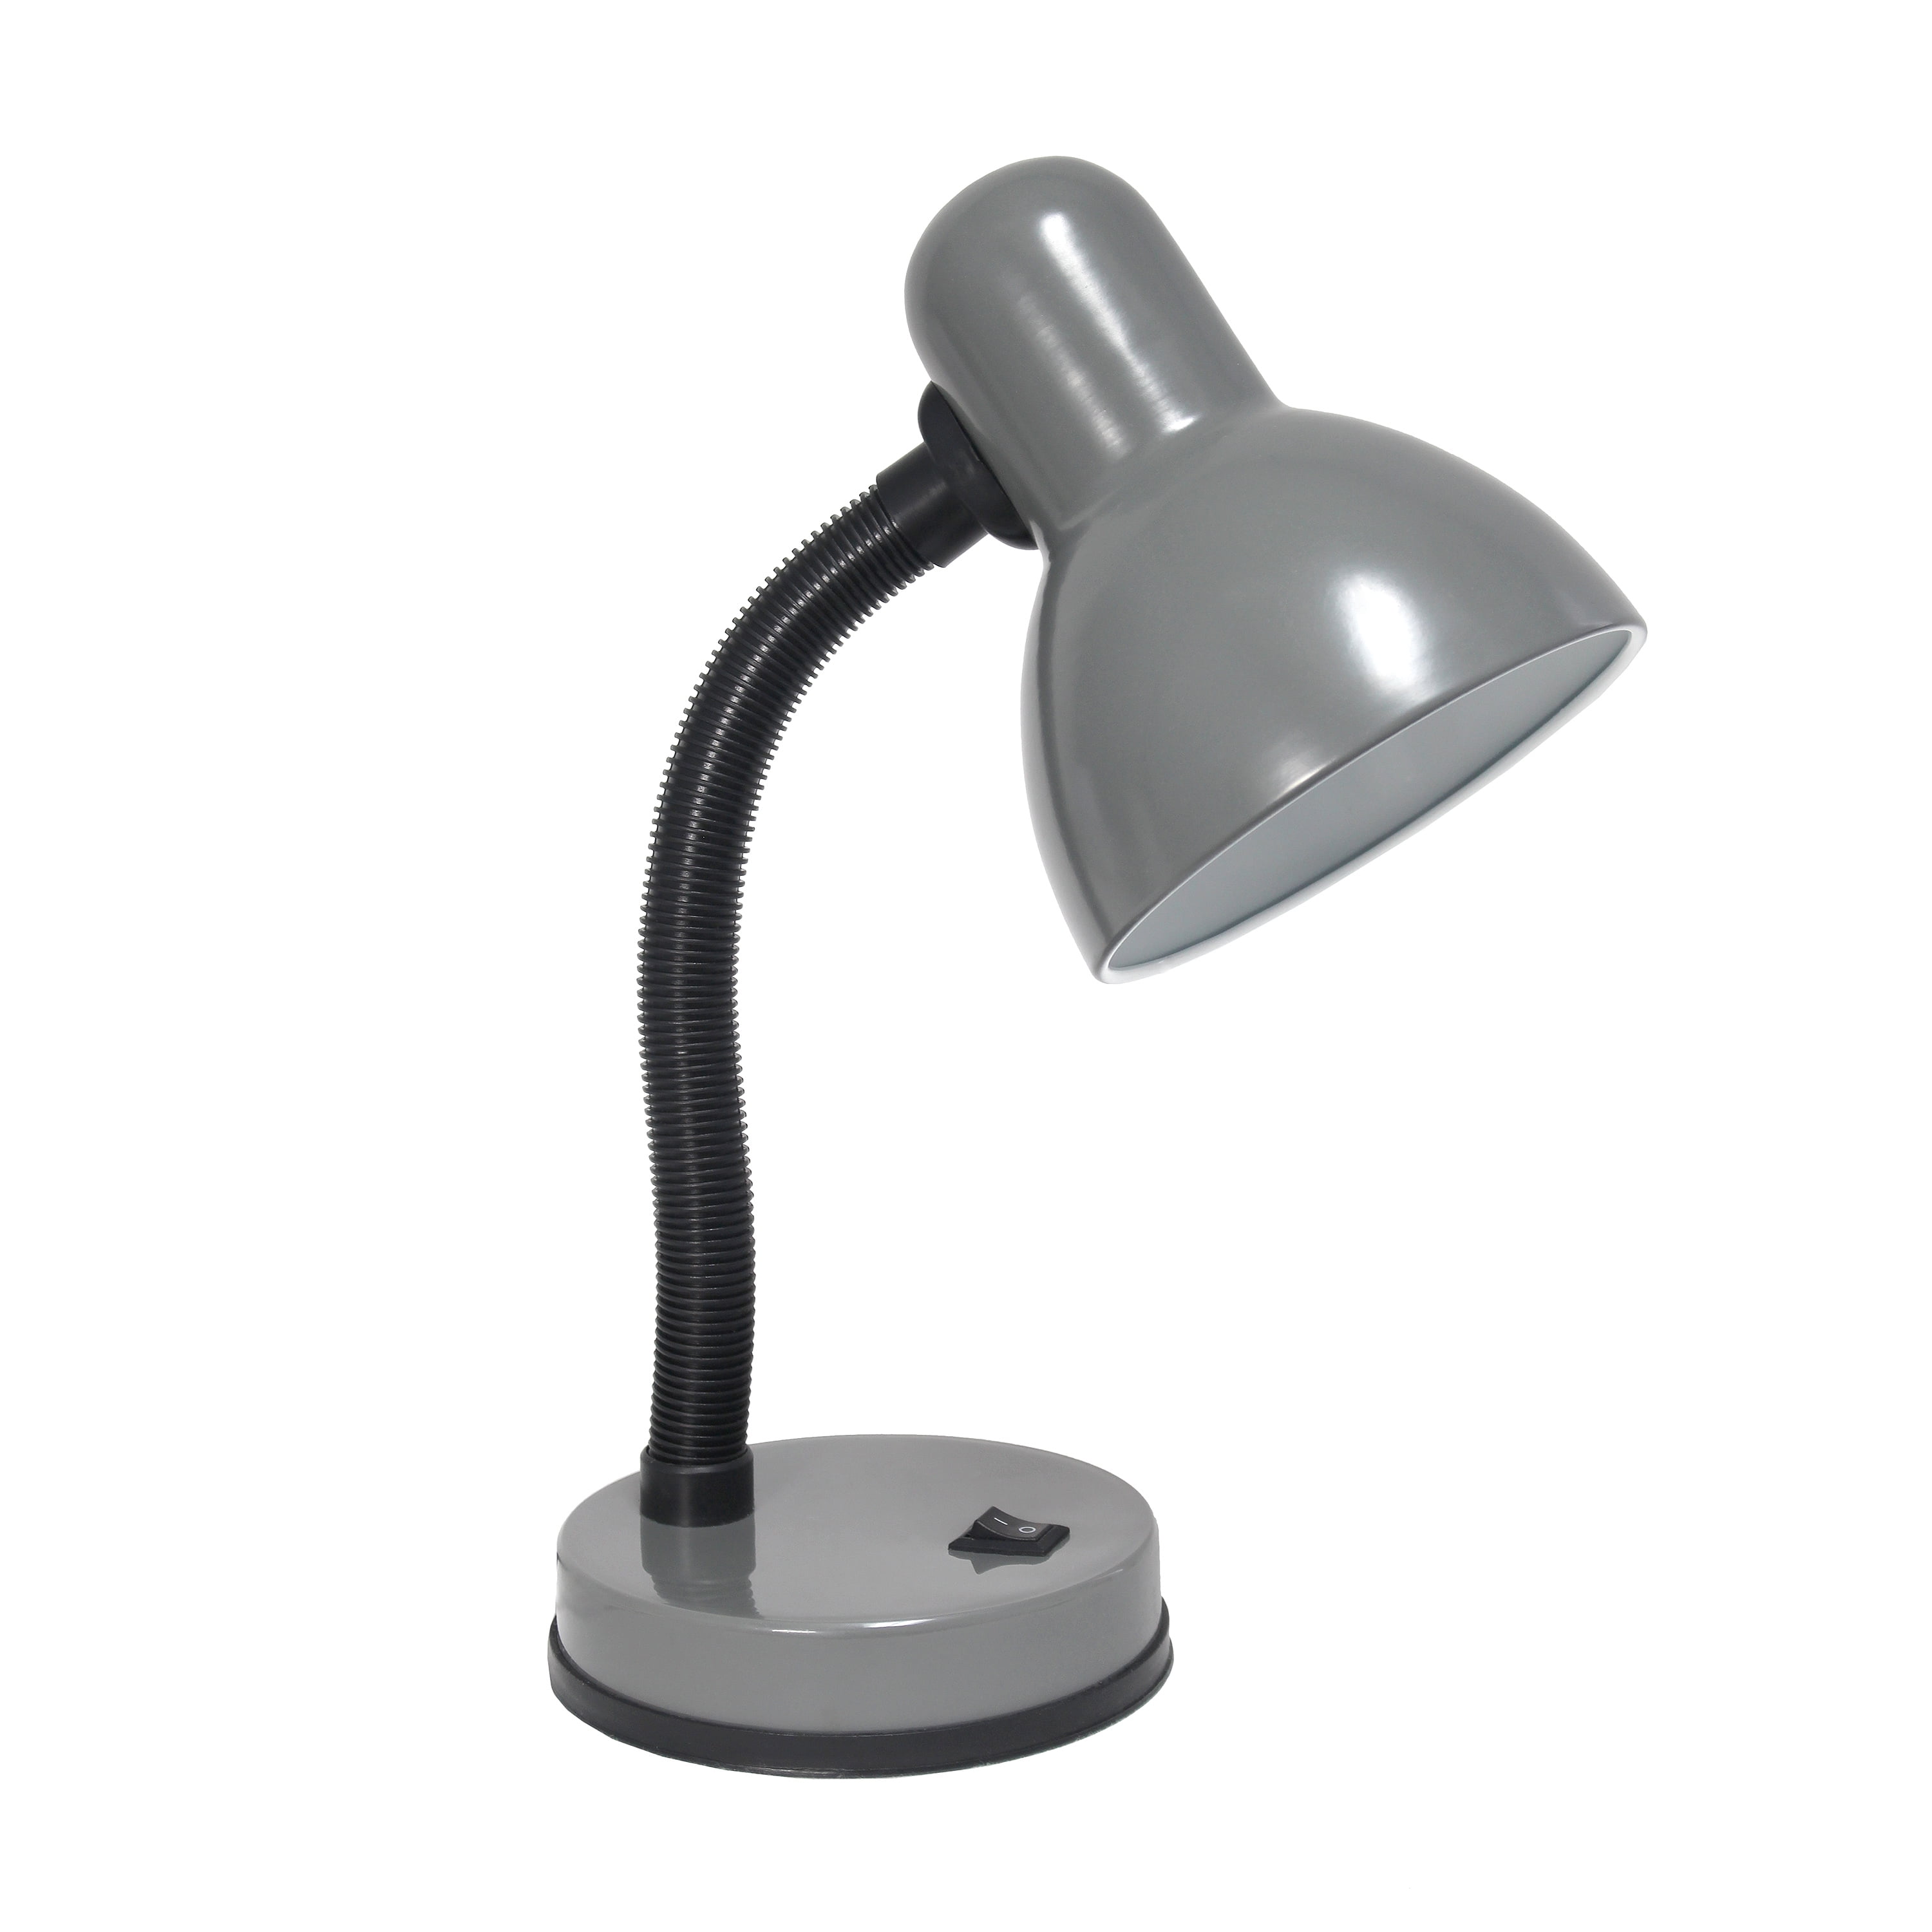 Ld1003-gry Basic Metal Desk Table Lamp With Flexible Hose Neck, Grey